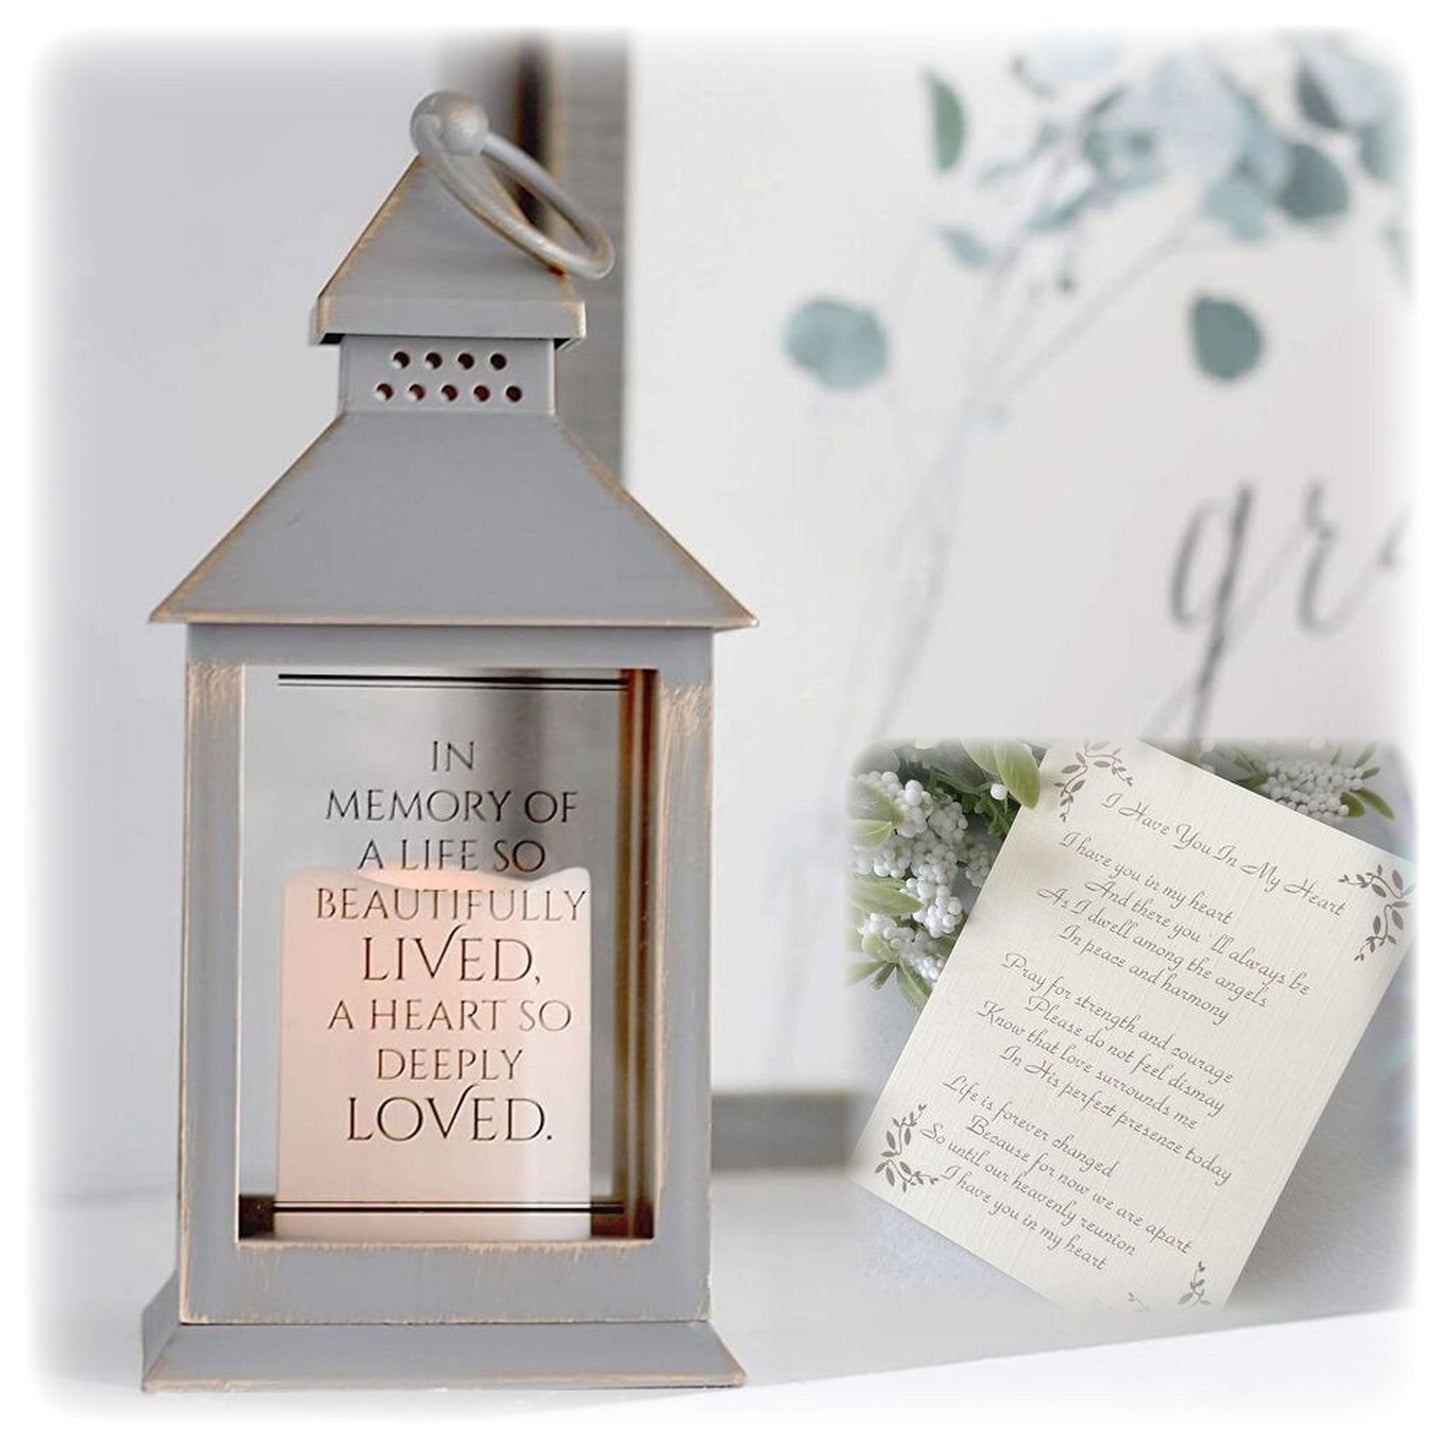 Life So Beautifully Lived Memorial Lantern Sympathy Gift with LED Candle